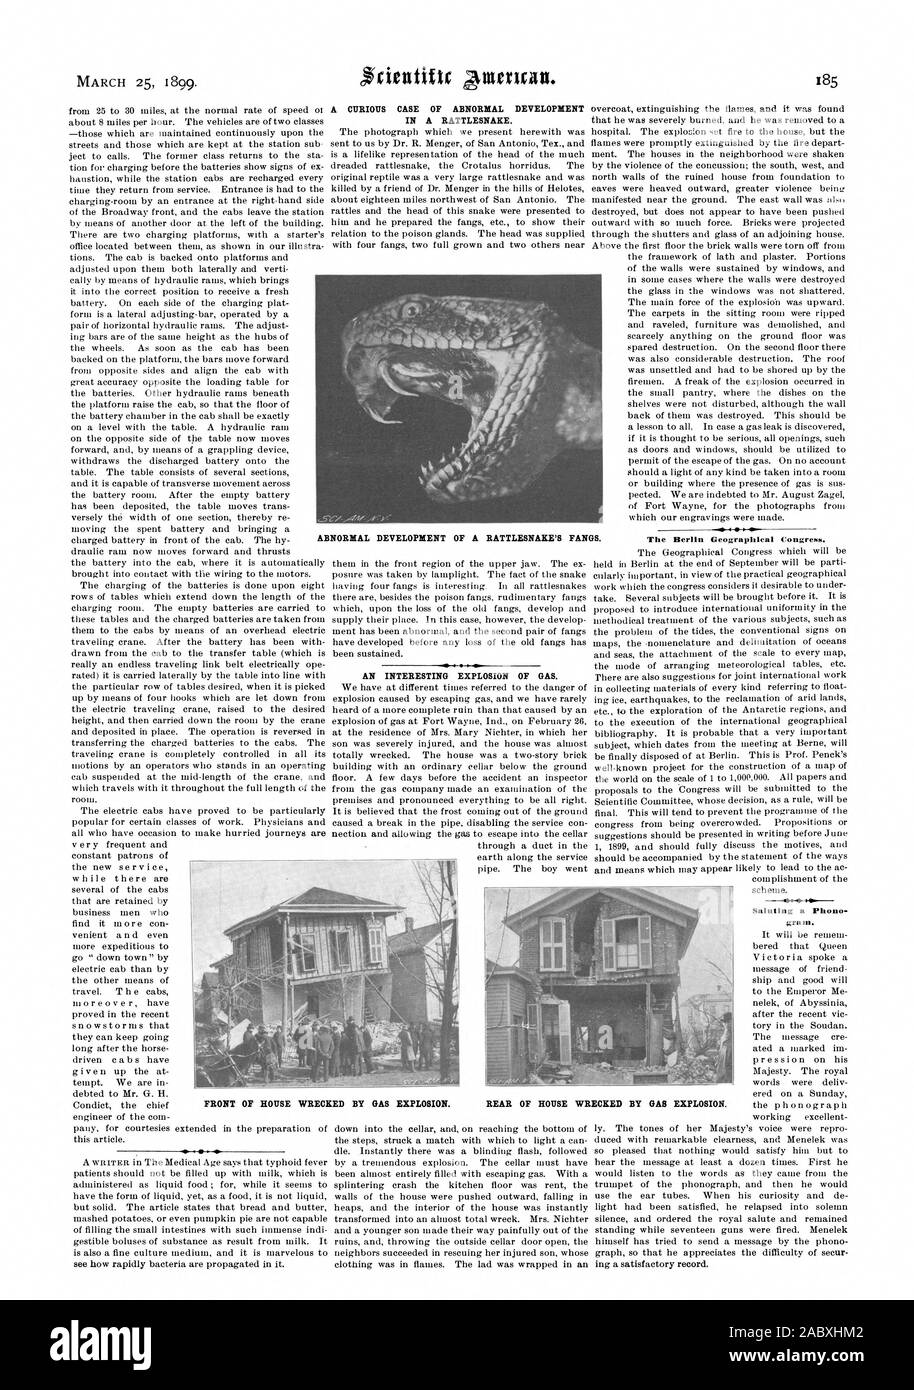 A CURIOUS CASE OF ABNORMAL DEVELOPMENT IN A RATTLESNAKE. AN INTERESTING EXPLOSION OF GAS. The Berlin Geographical Congress. Saluting a Phono gram. ABNORMAL DEVELOPMENT OF A RATTLESNAKE'S FANGS. FRONT OF HOUSE WRECKED BY GAS EXPLOSION. REAR OF HOUSE WRECKED BY GAB EXPLOSION., scientific american, 1899-03-25 Stock Photo